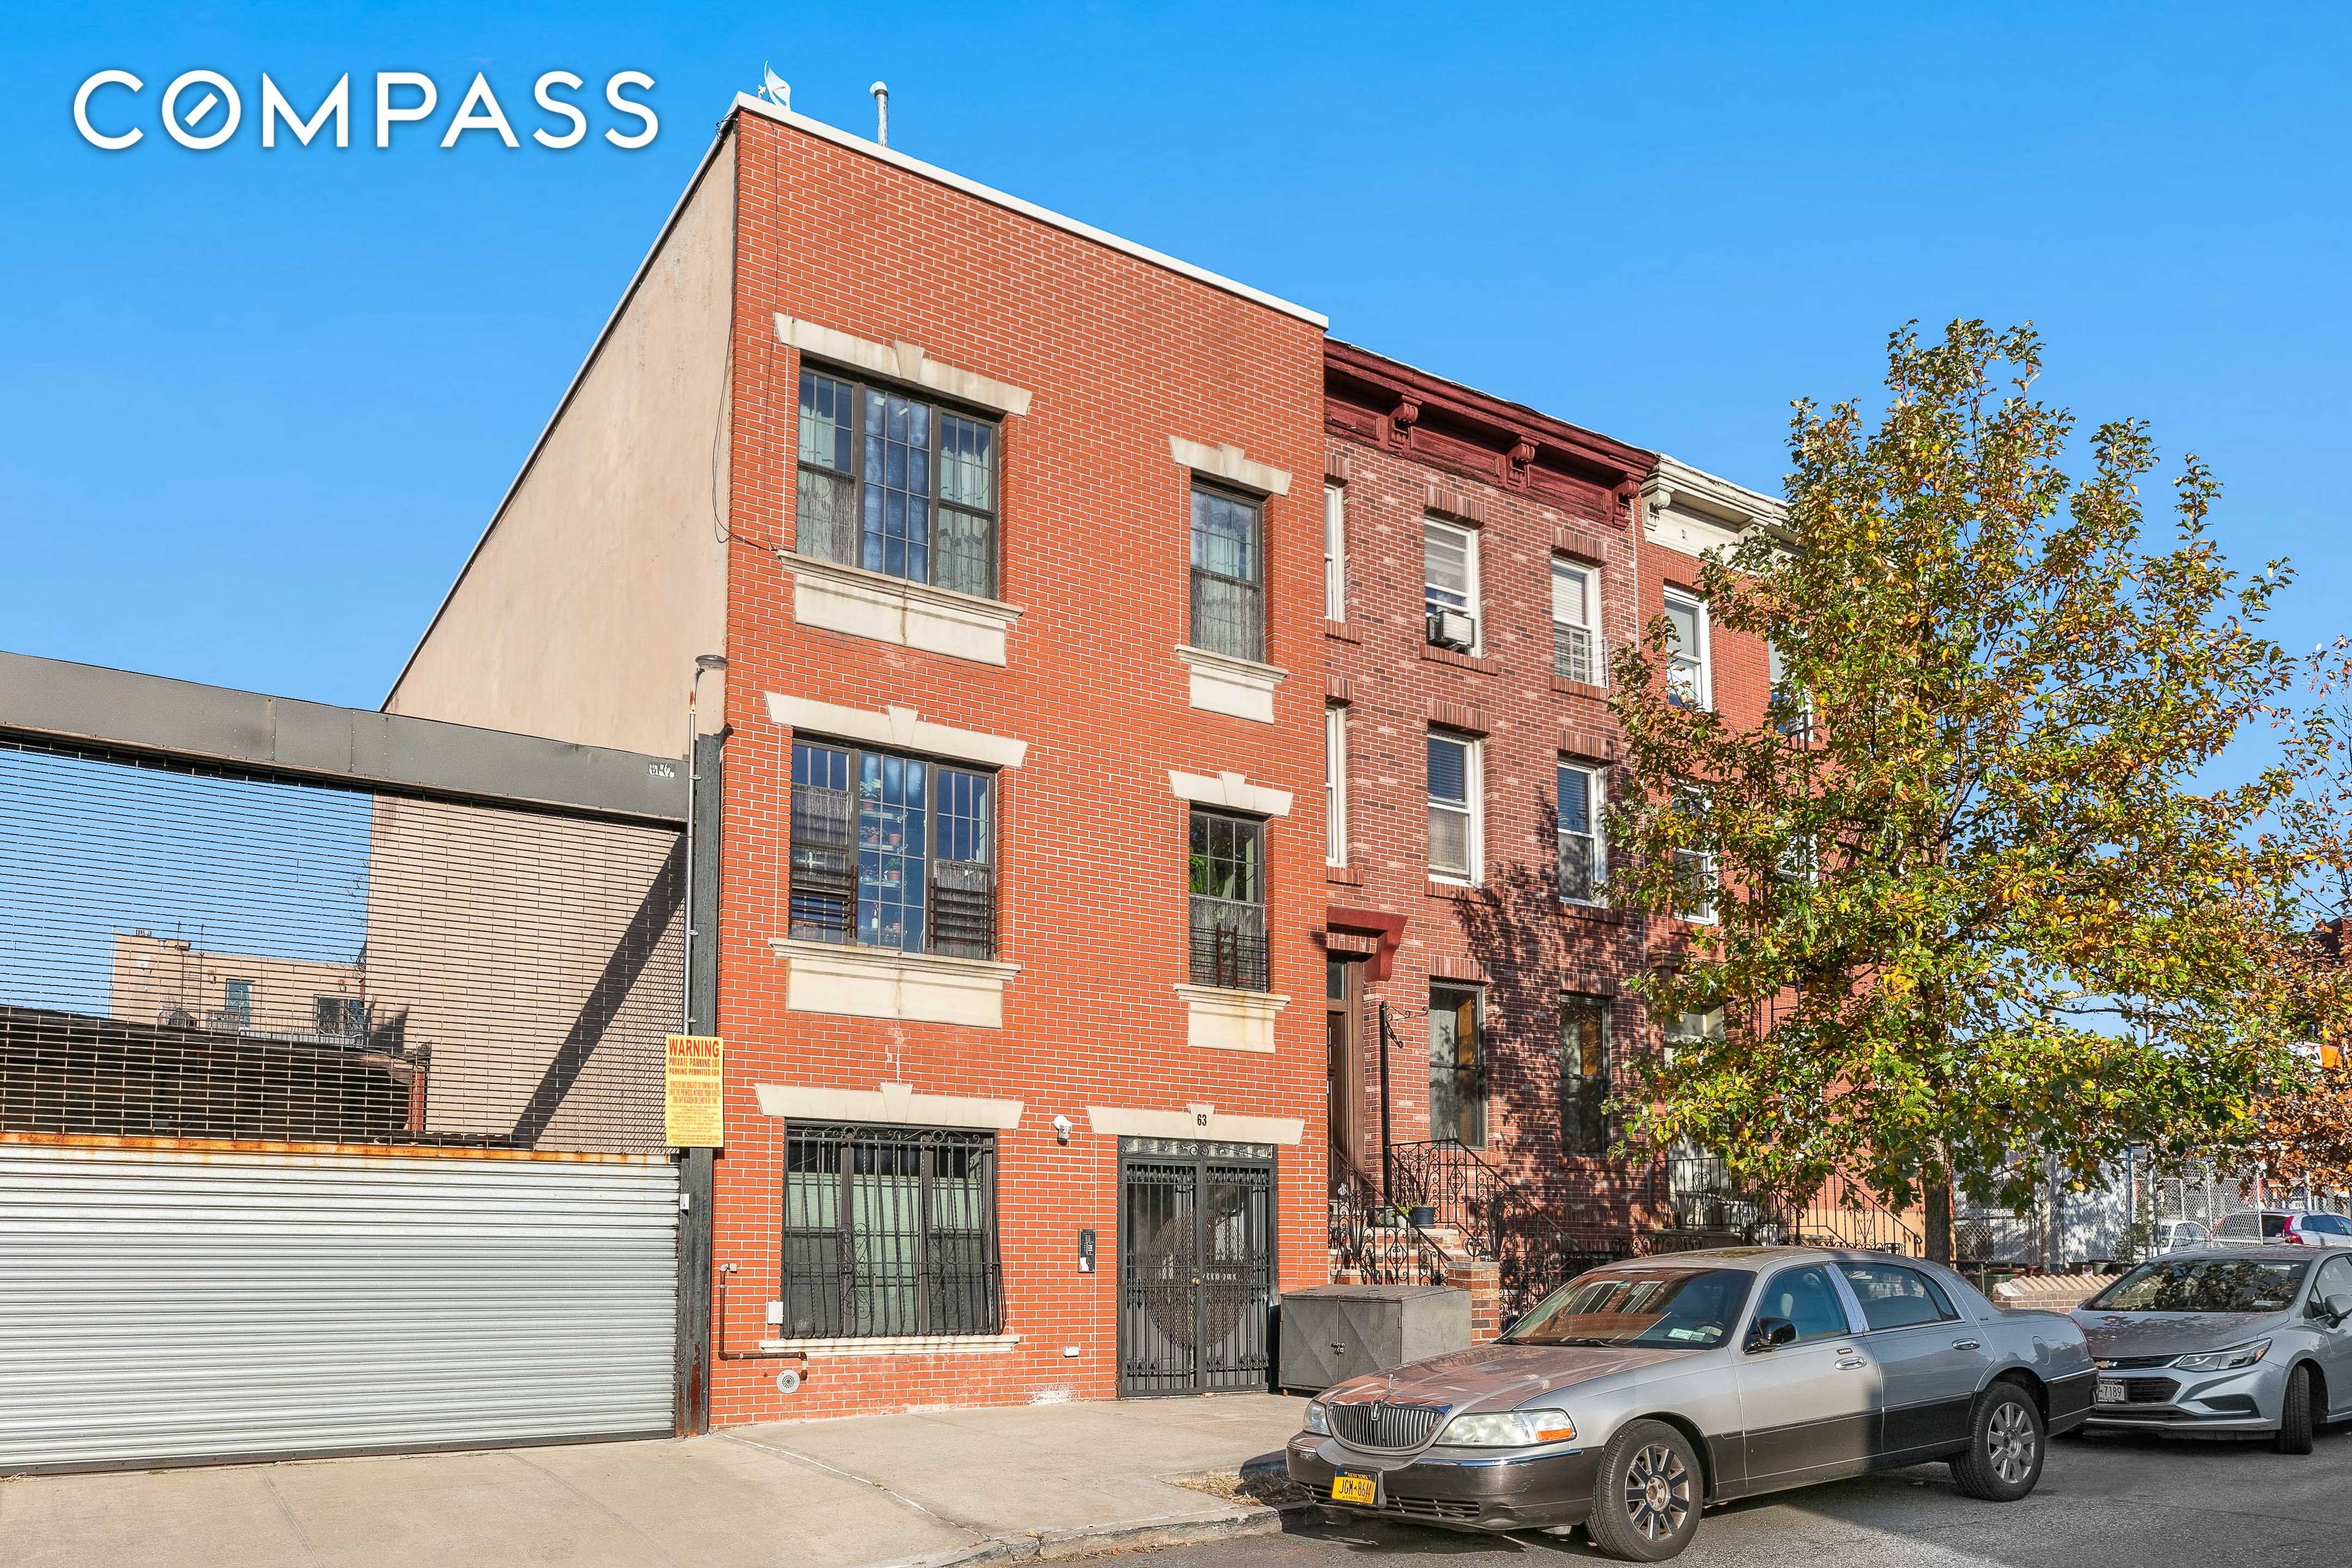 Here s a rare opportunity to own a superb recently constructed 3 family brick townhouse in Brooklyn s vibrant and growing Columbia Waterfront District.